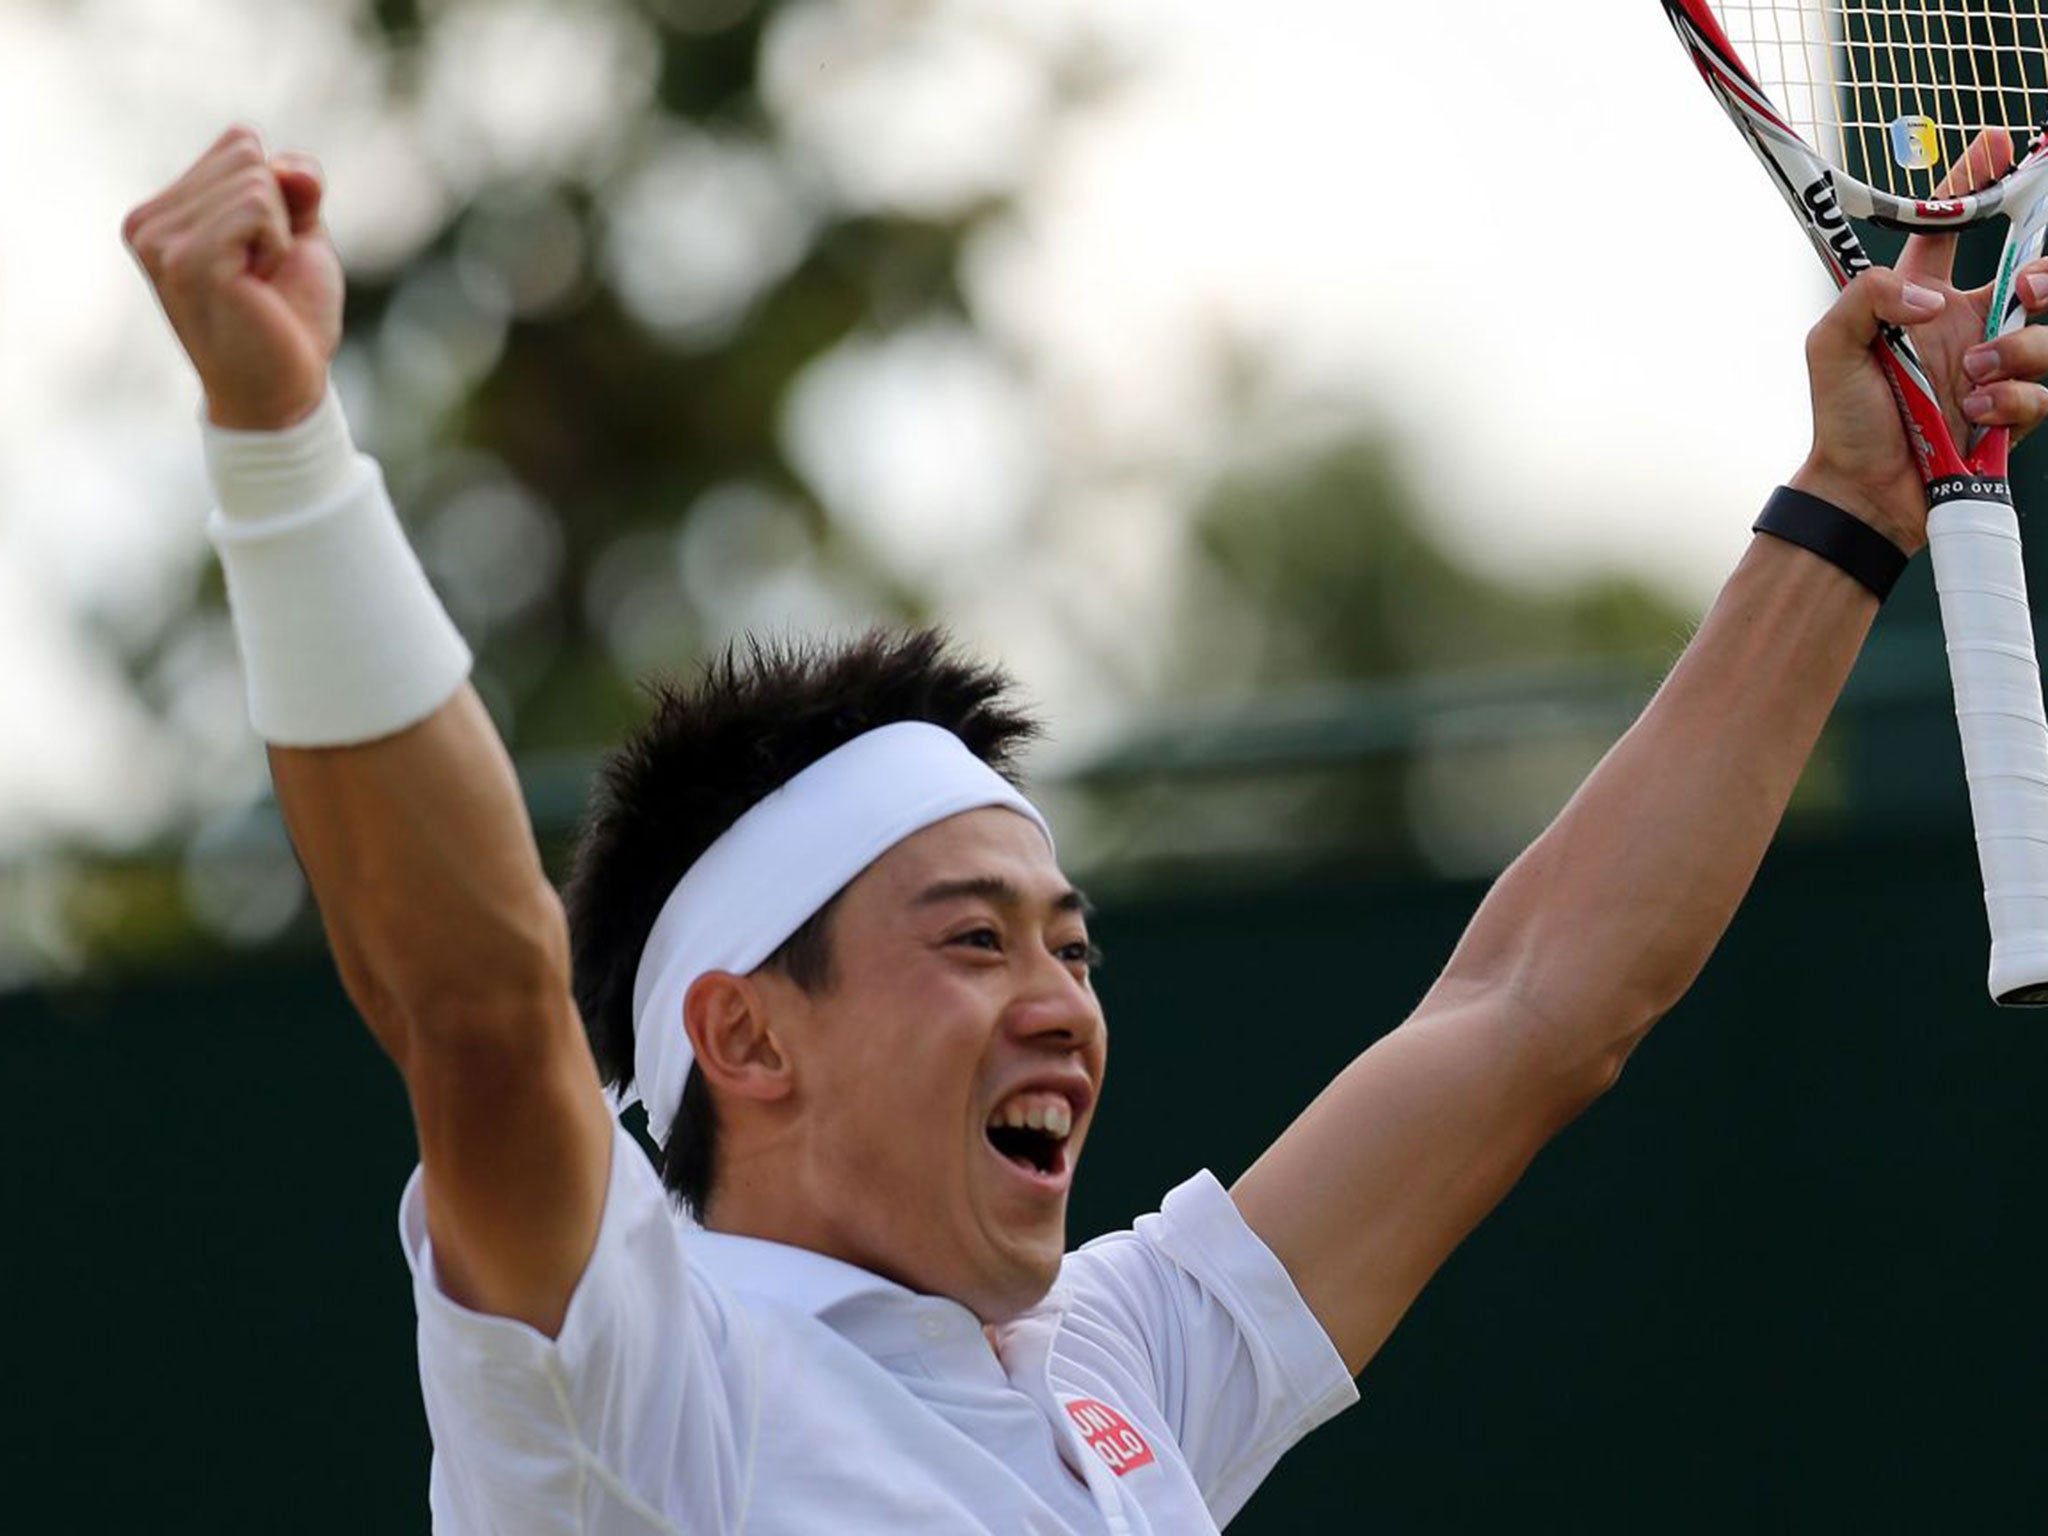 Kei Nishikori is through to the fourth round for the first time. He will take on Milos Raonic of Canada